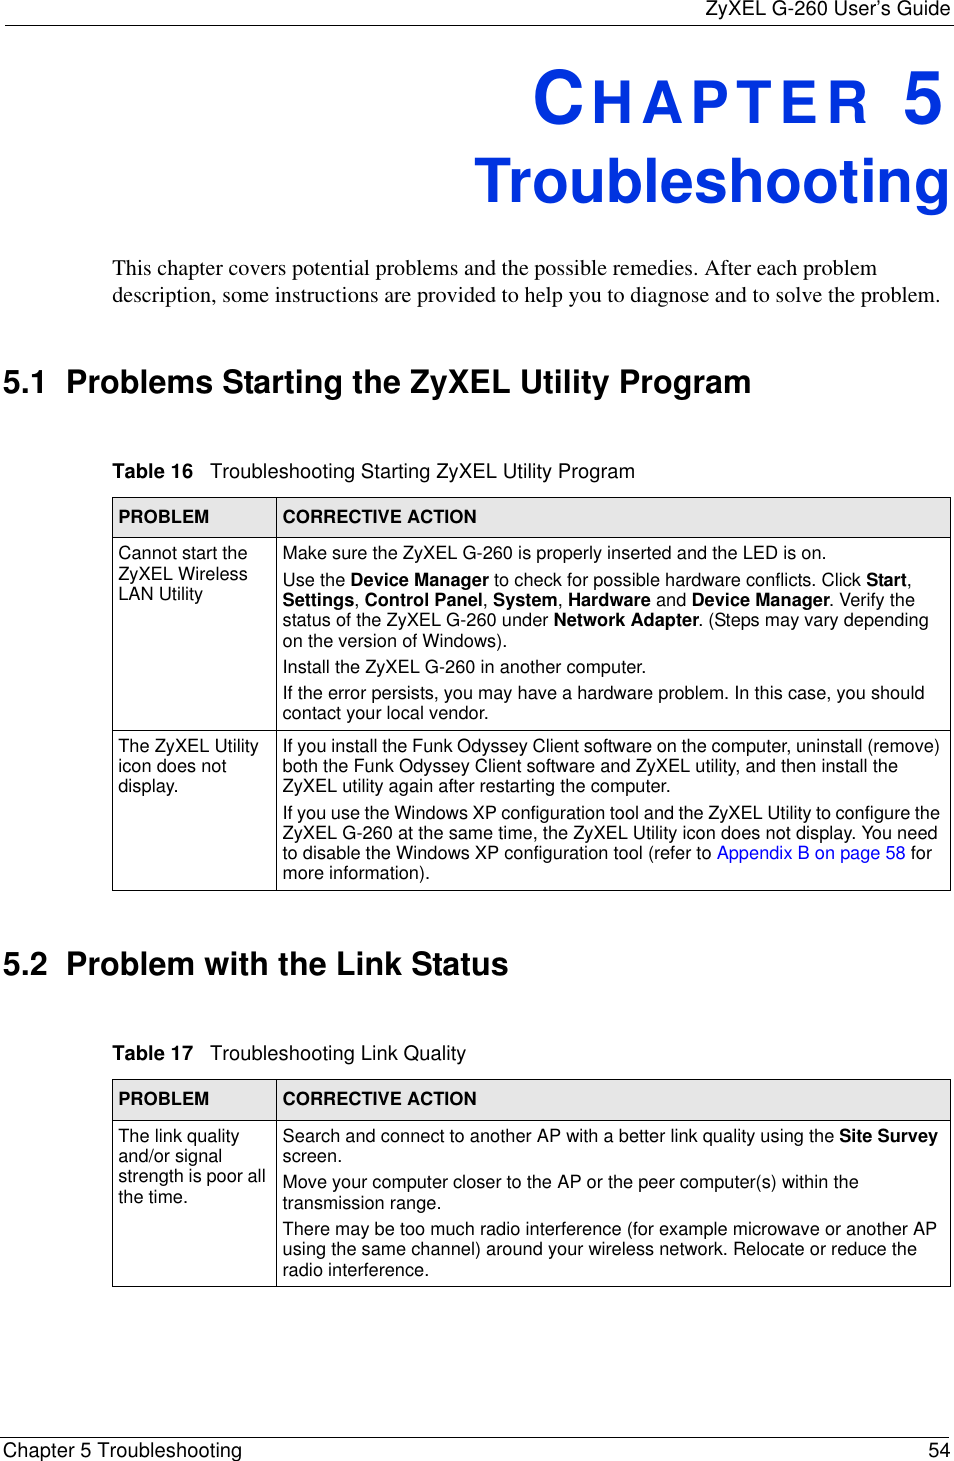 ZyXEL G-260 User’s GuideChapter 5 Troubleshooting 54CHAPTER 5   TroubleshootingThis chapter covers potential problems and the possible remedies. After each problem description, some instructions are provided to help you to diagnose and to solve the problem.5.1  Problems Starting the ZyXEL Utility Program5.2  Problem with the Link StatusTable 16   Troubleshooting Starting ZyXEL Utility Program PROBLEM CORRECTIVE ACTIONCannot start the ZyXEL Wireless LAN UtilityMake sure the ZyXEL G-260 is properly inserted and the LED is on. Use the Device Manager to check for possible hardware conflicts. Click Start,Settings,Control Panel,System,Hardware and Device Manager. Verify the status of the ZyXEL G-260 under Network Adapter. (Steps may vary depending on the version of Windows). Install the ZyXEL G-260 in another computer.If the error persists, you may have a hardware problem. In this case, you should contact your local vendor.The ZyXEL Utility icon does not display.If you install the Funk Odyssey Client software on the computer, uninstall (remove) both the Funk Odyssey Client software and ZyXEL utility, and then install the ZyXEL utility again after restarting the computer.If you use the Windows XP configuration tool and the ZyXEL Utility to configure the ZyXEL G-260 at the same time, the ZyXEL Utility icon does not display. You need to disable the Windows XP configuration tool (refer to Appendix B on page 58 for more information).Table 17   Troubleshooting Link Quality PROBLEM CORRECTIVE ACTIONThe link quality and/or signal strength is poor all the time.Search and connect to another AP with a better link quality using the Site Survey screen.Move your computer closer to the AP or the peer computer(s) within the transmission range.There may be too much radio interference (for example microwave or another AP using the same channel) around your wireless network. Relocate or reduce the radio interference.